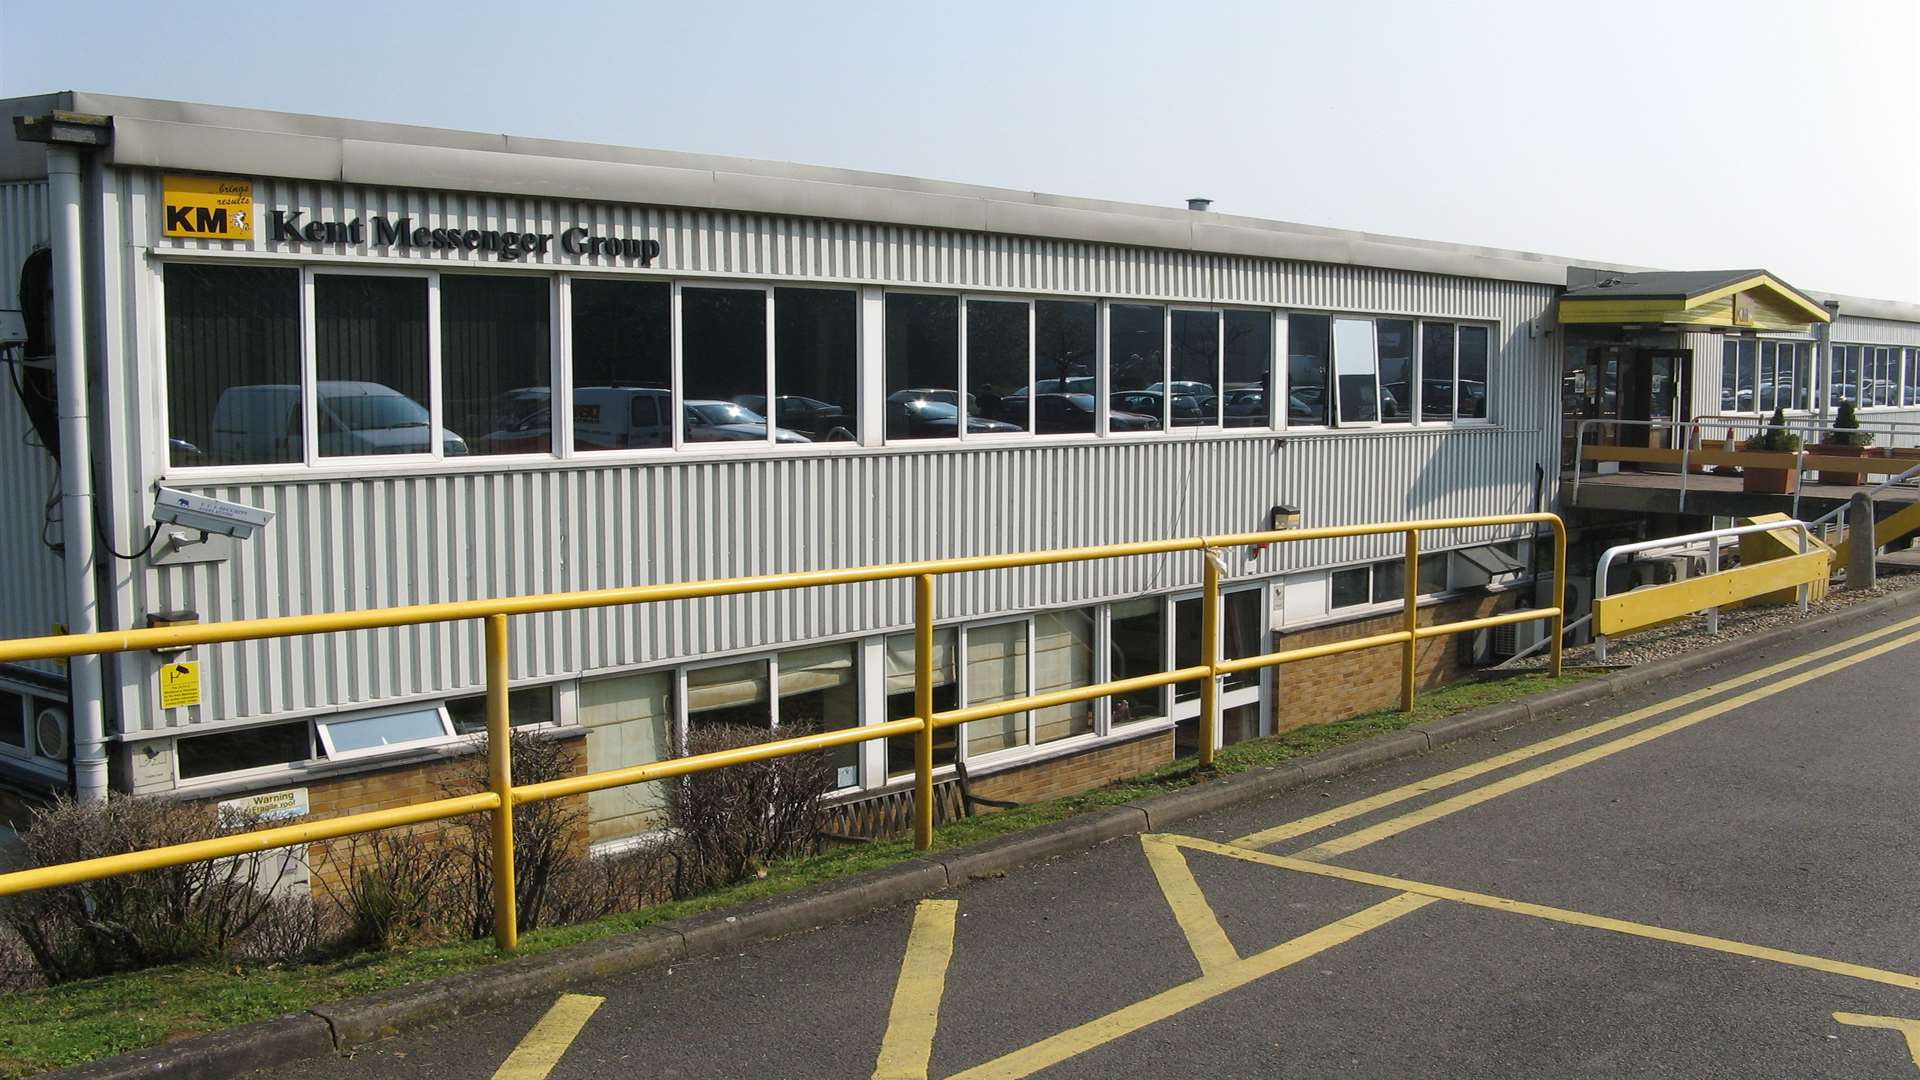 How the KM Group headquarters in Larkfield looked in 2007